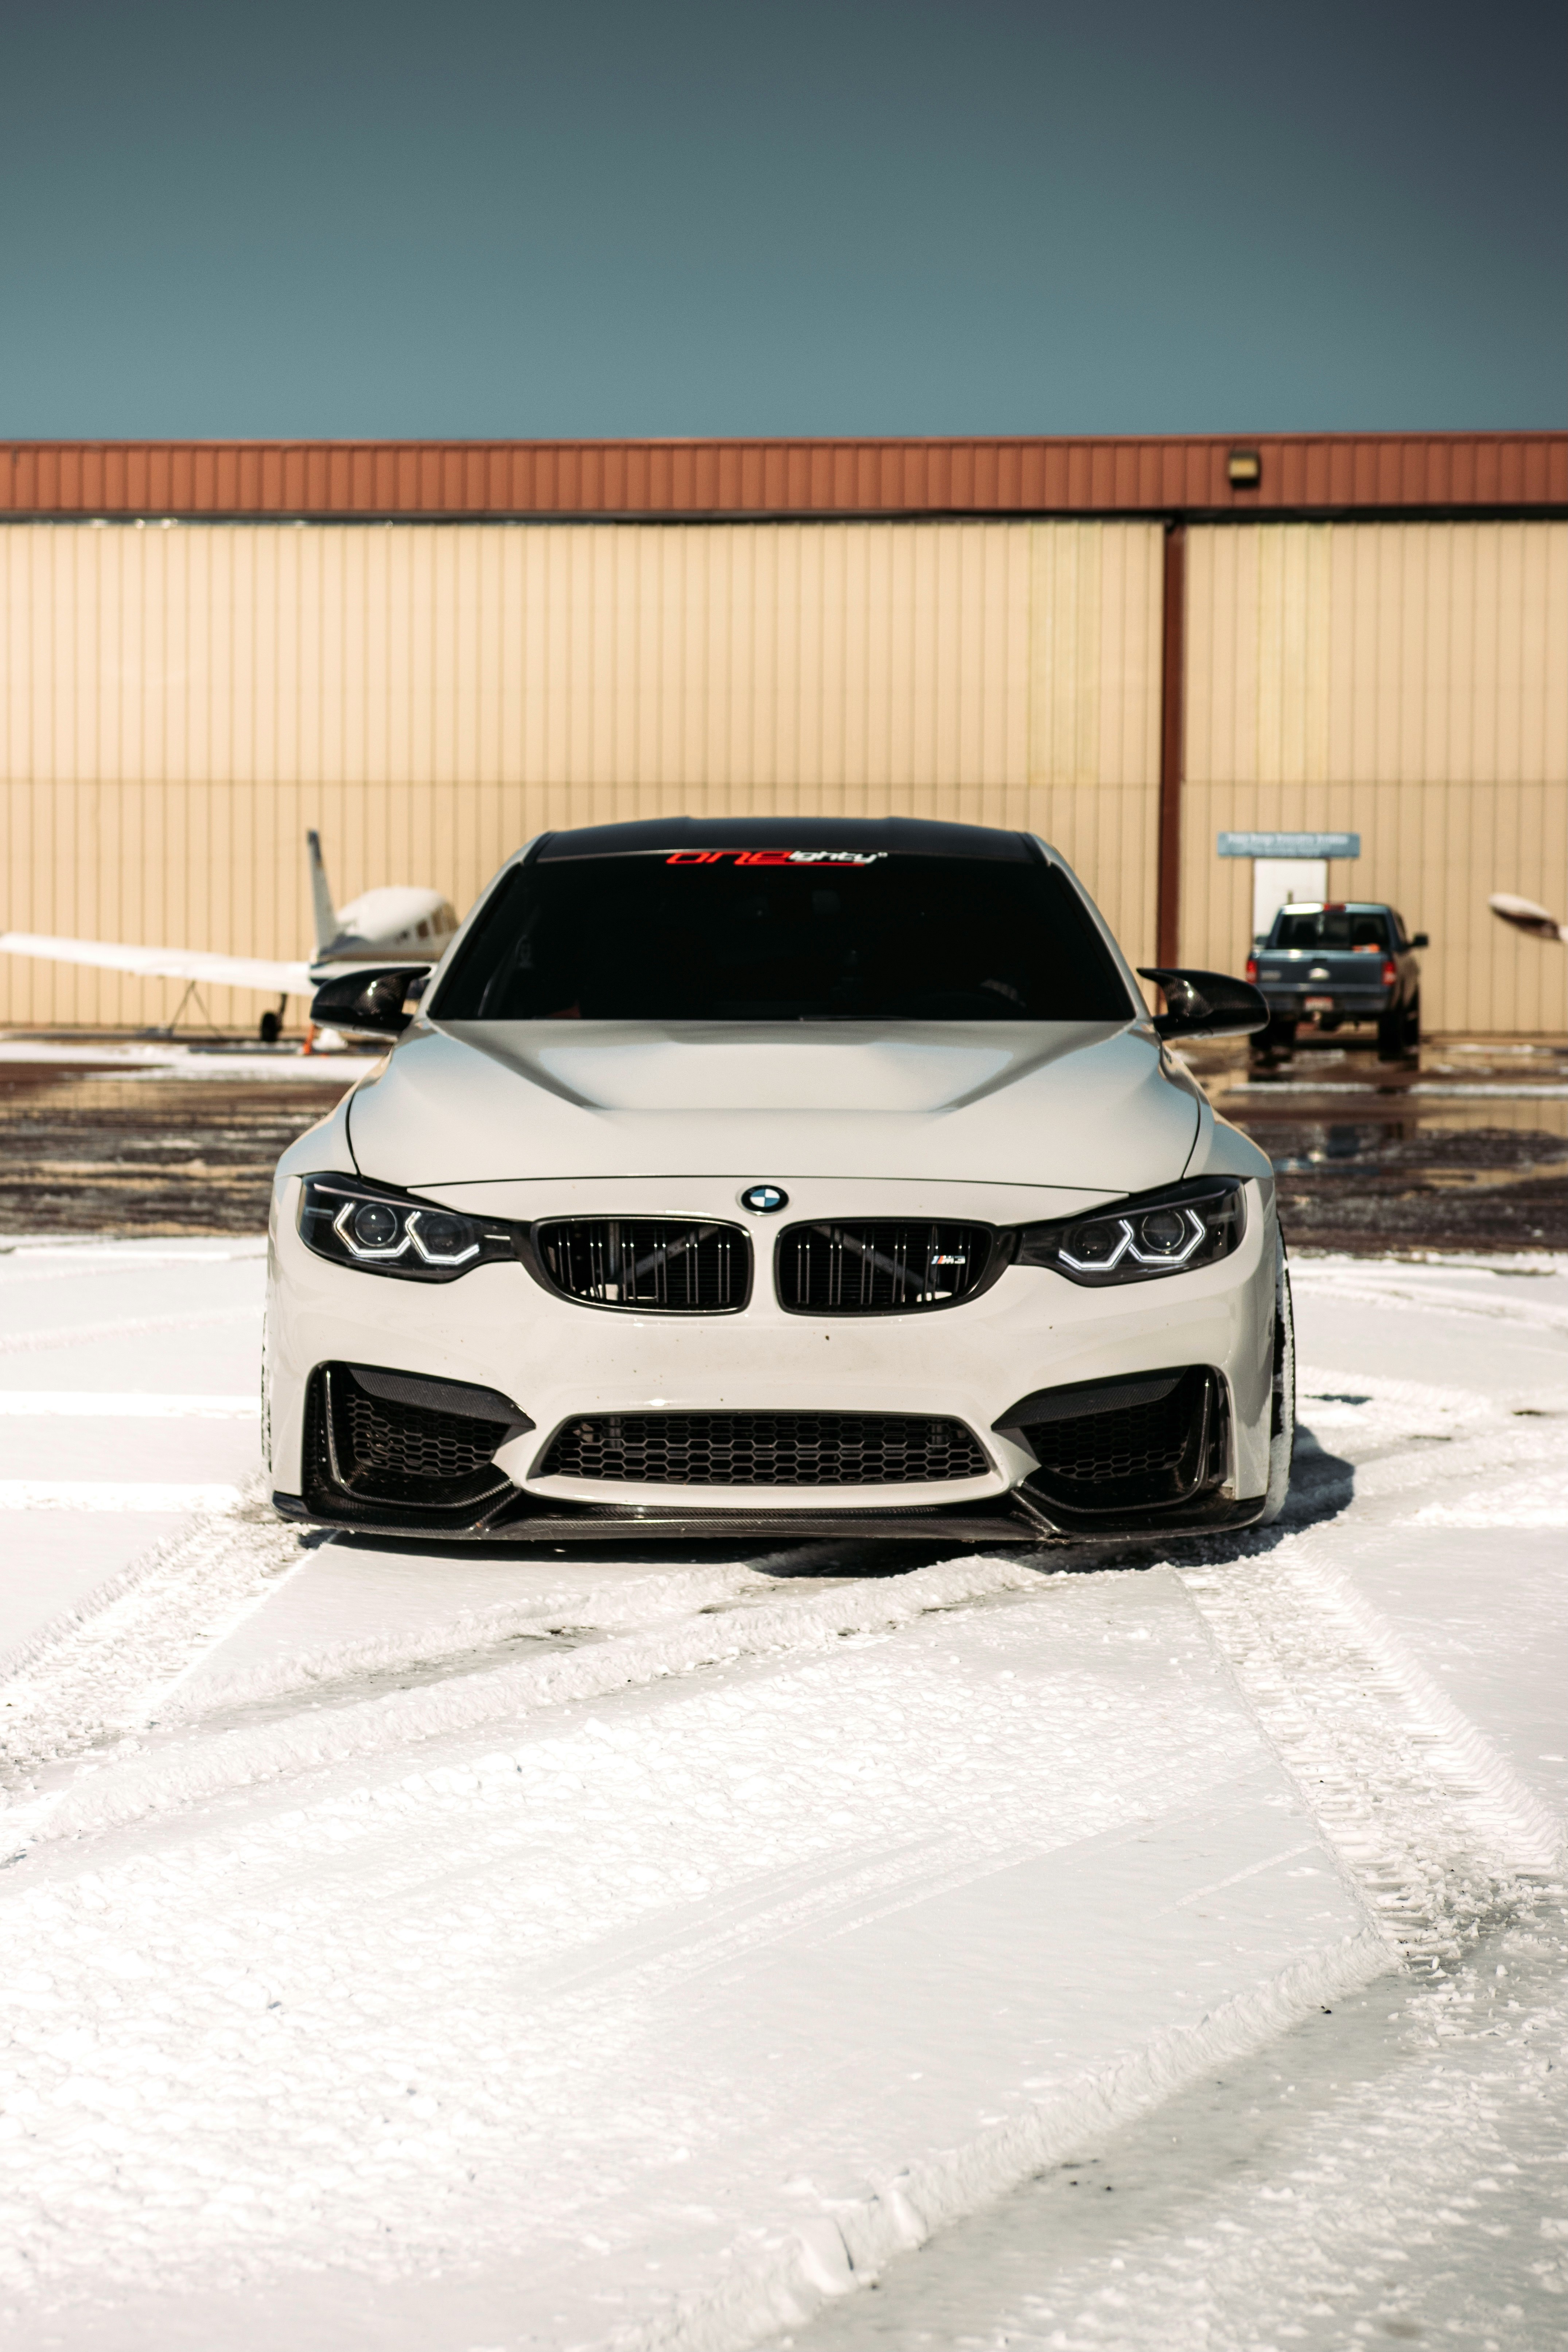 white bmw car on snow covered ground during daytime